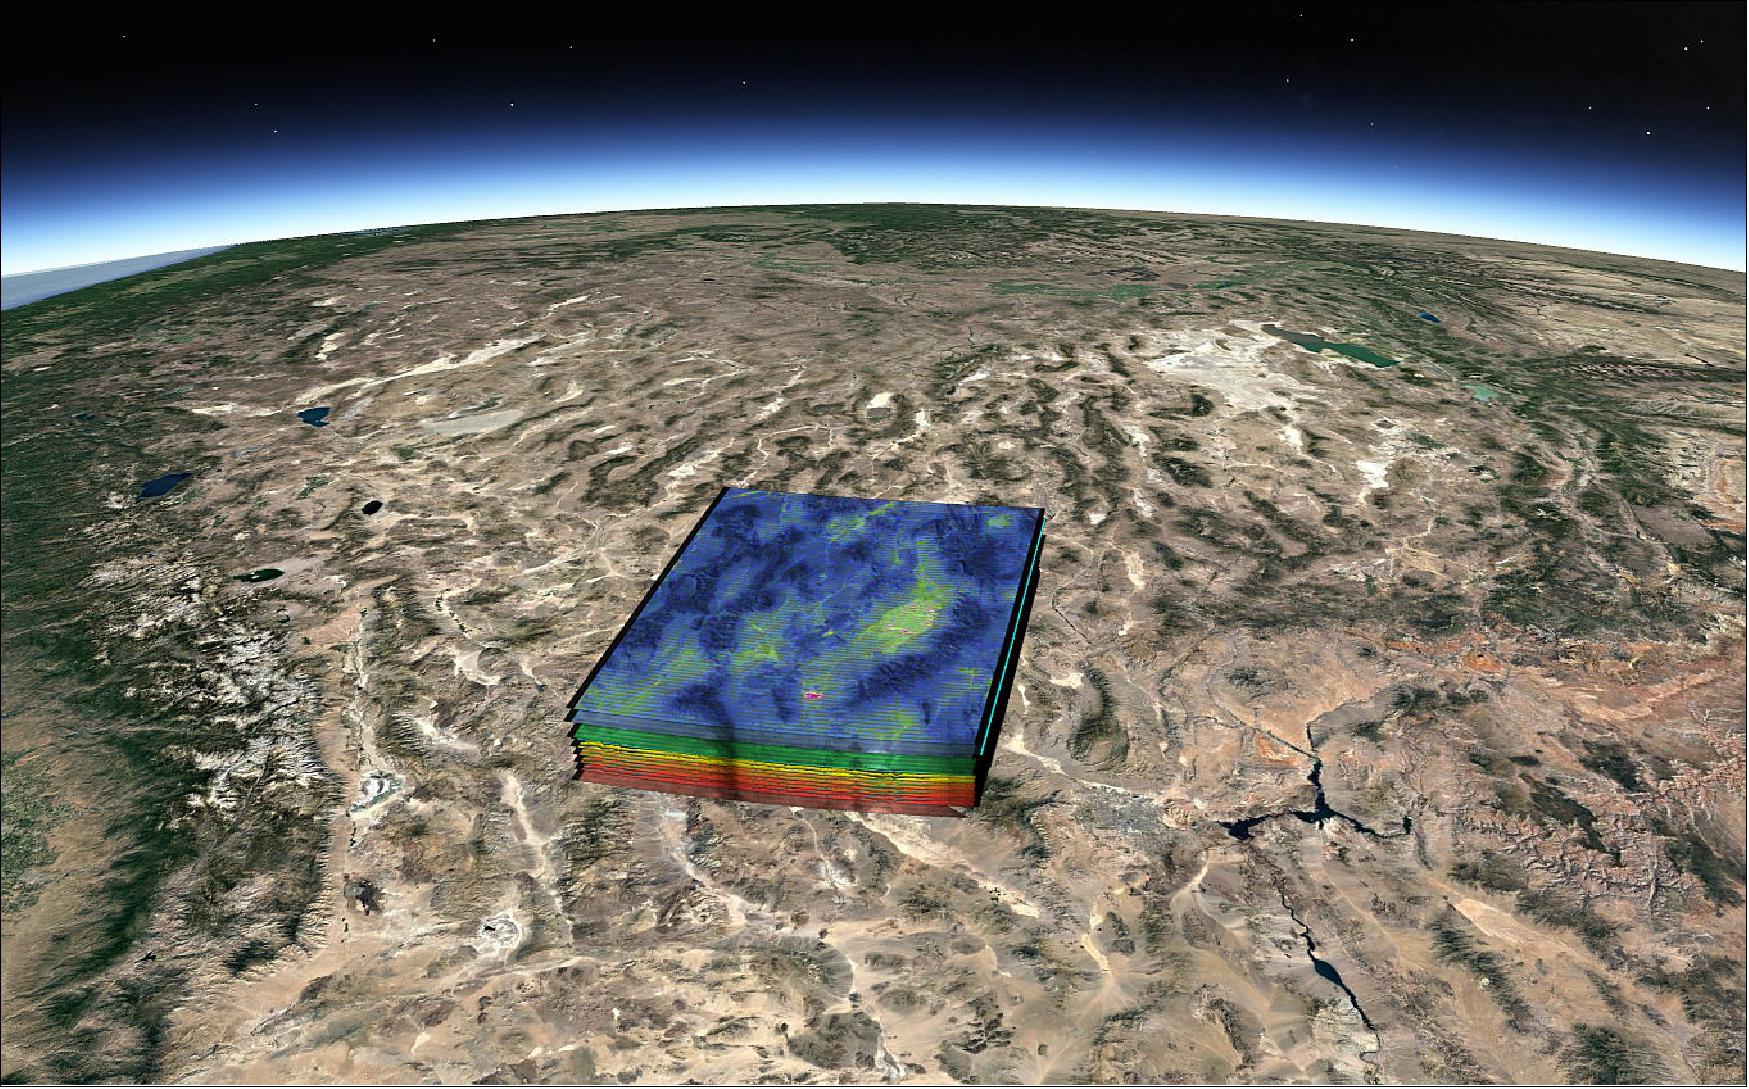 Figure 9: HyperScout 1, the first miniaturized hyperspectral imager for space, successfully demonstrated that it is possible to process the images that are gathered by a satellite on board. By knowing the position of the satellite and in which direction it points, the instrument knows what it is looking at and can interpret the data, thus eliminating the need to download the data. The HyperScout 1 camera, launched in February on board the GOMX-4B satellite, produced the so-called ARD (Analysis Ready Data) on board for the first time. HyperScout is the first hyperspectral instrument in space capable of doing this (image credit: Cosine Research)